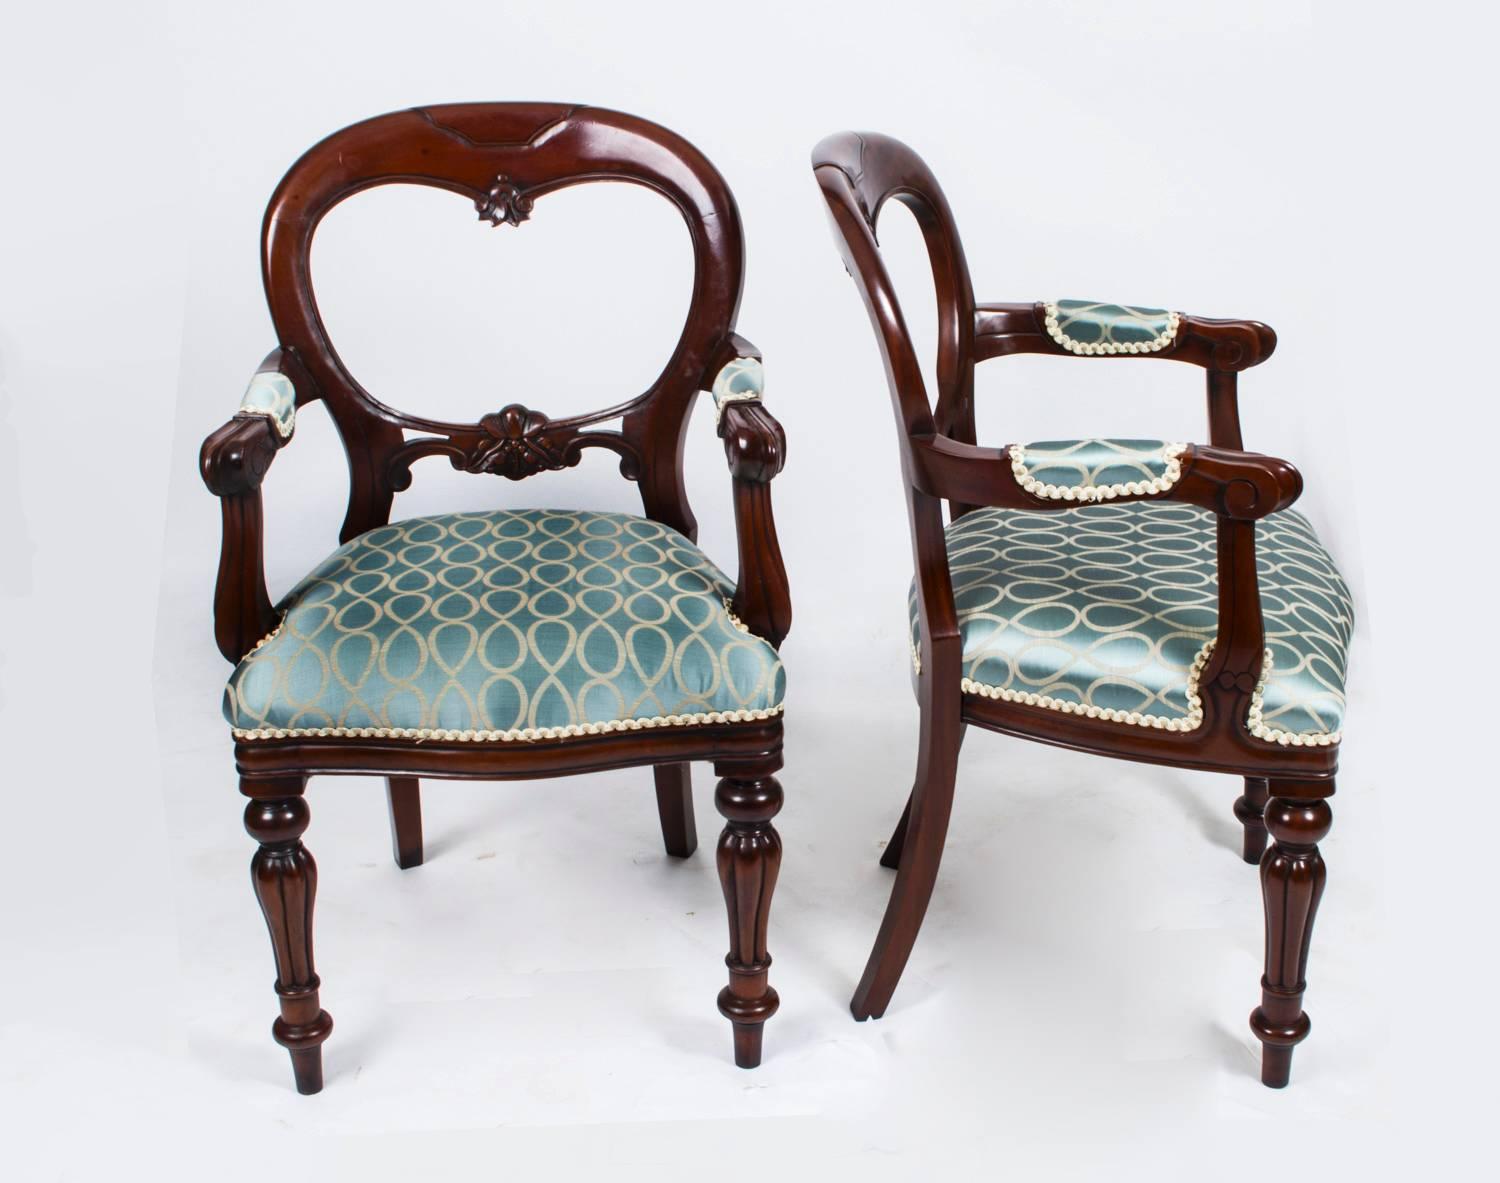 This is a beautiful set of twelve vintage Victorian style mahogany balloon back dining chairs, dating from the second half of the 20th century.

This set consists of ten chairs and two armchairs all skillfully carved from solid mahogany. The